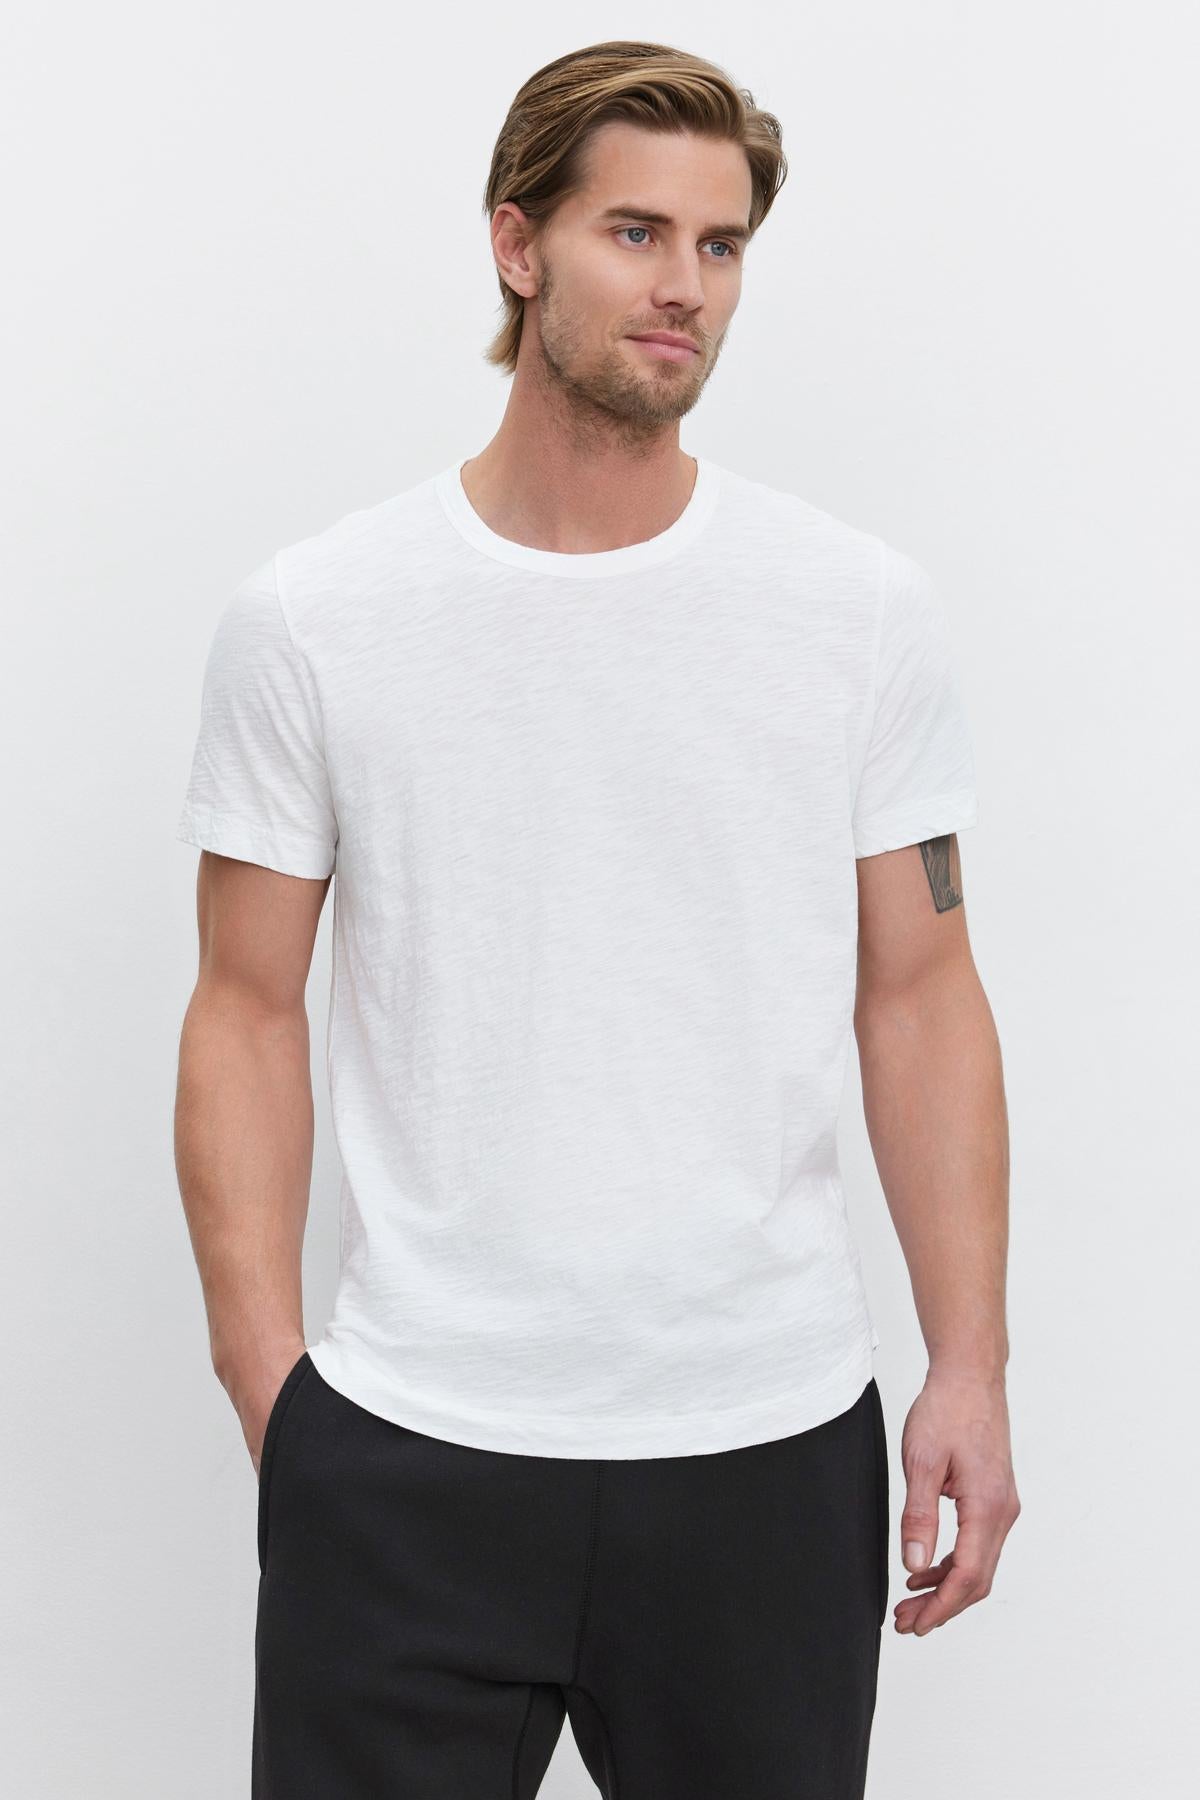 A man with blond hair posing in a white Velvet by Graham & Spencer slub knit AMARO TEE with a crew neck and black pants.-35867457519809